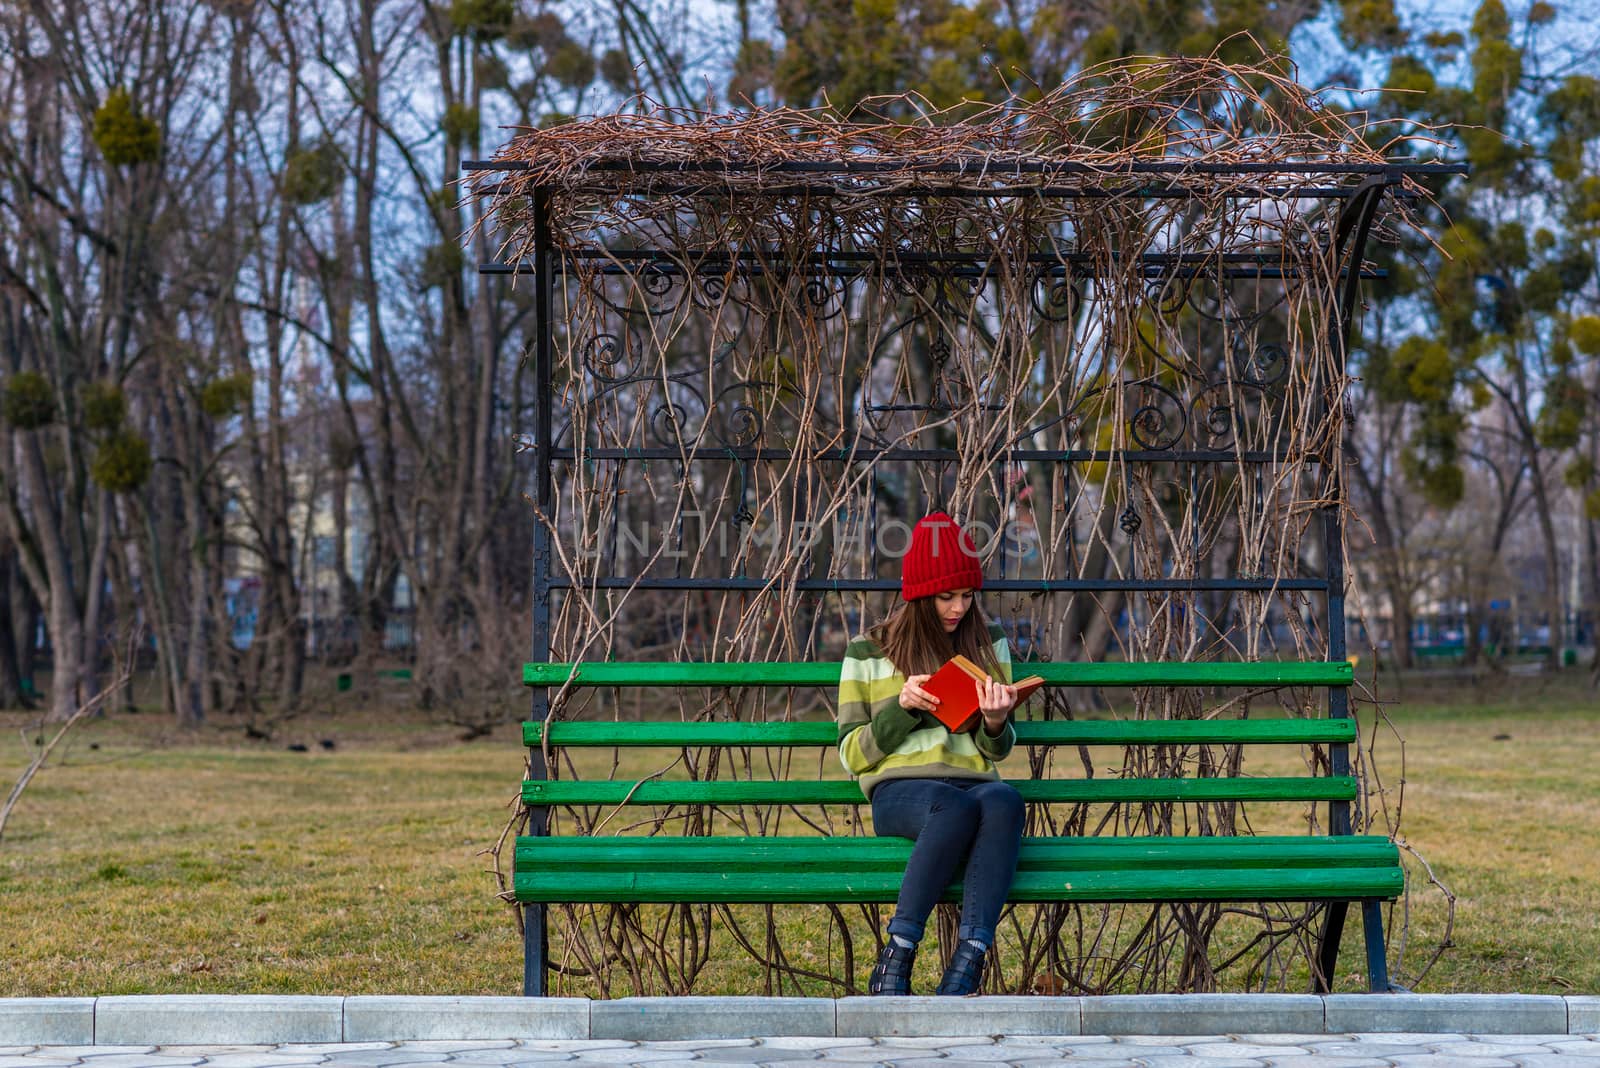 A teenager girl is sitting on a bench in a park and reading book with red cover.